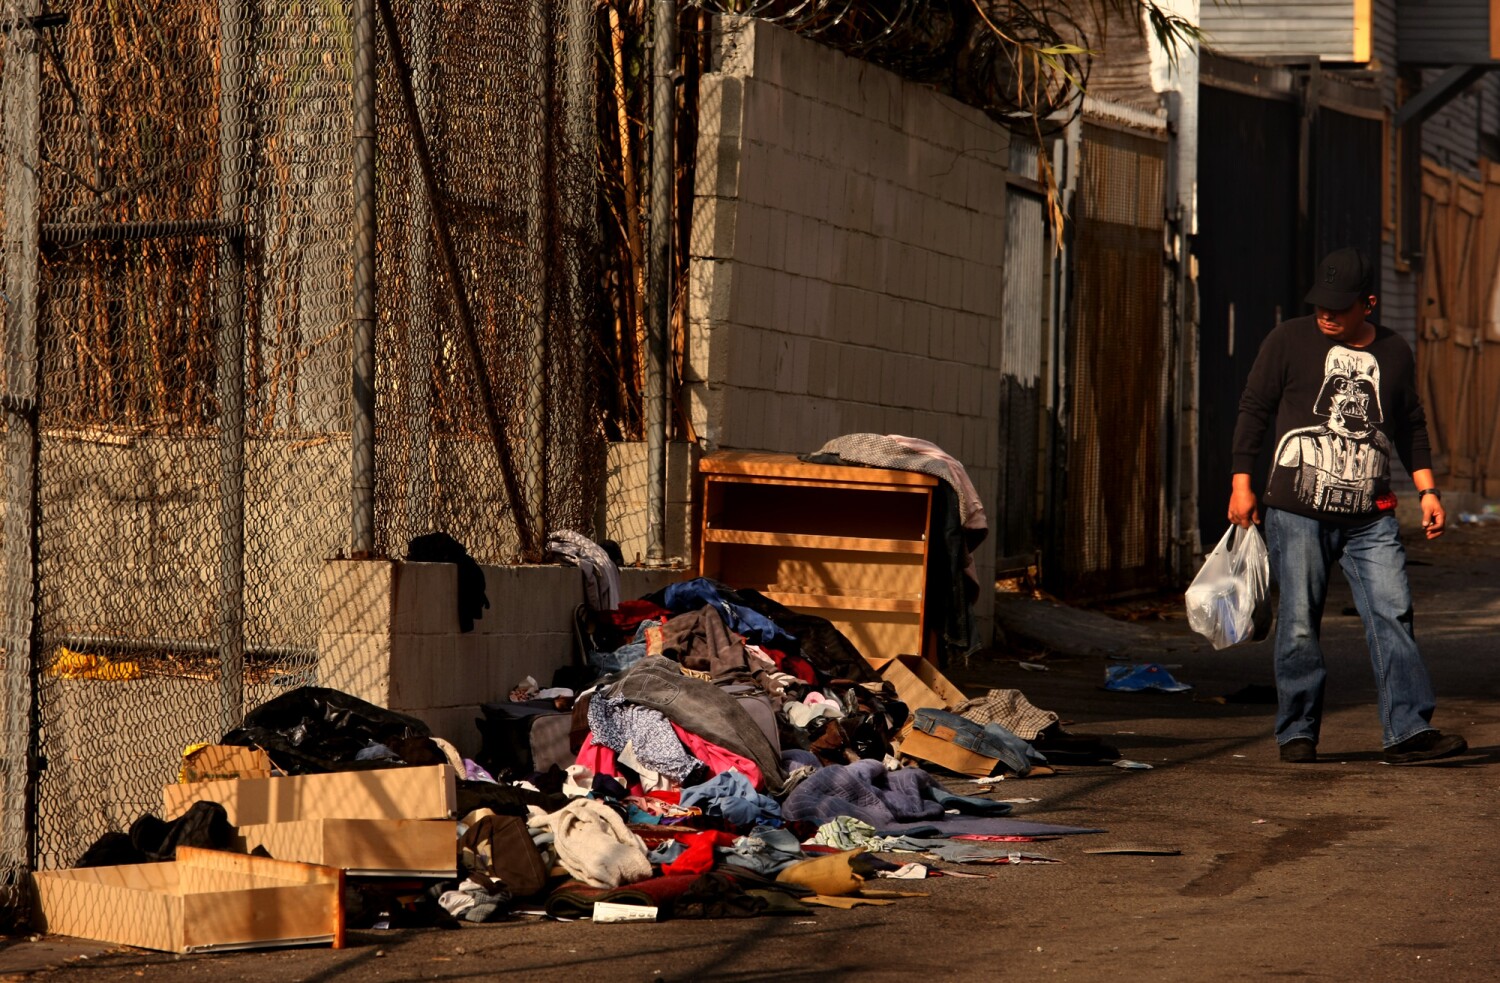 L.A.'s illegal dumping problem is worsening, controller's report says